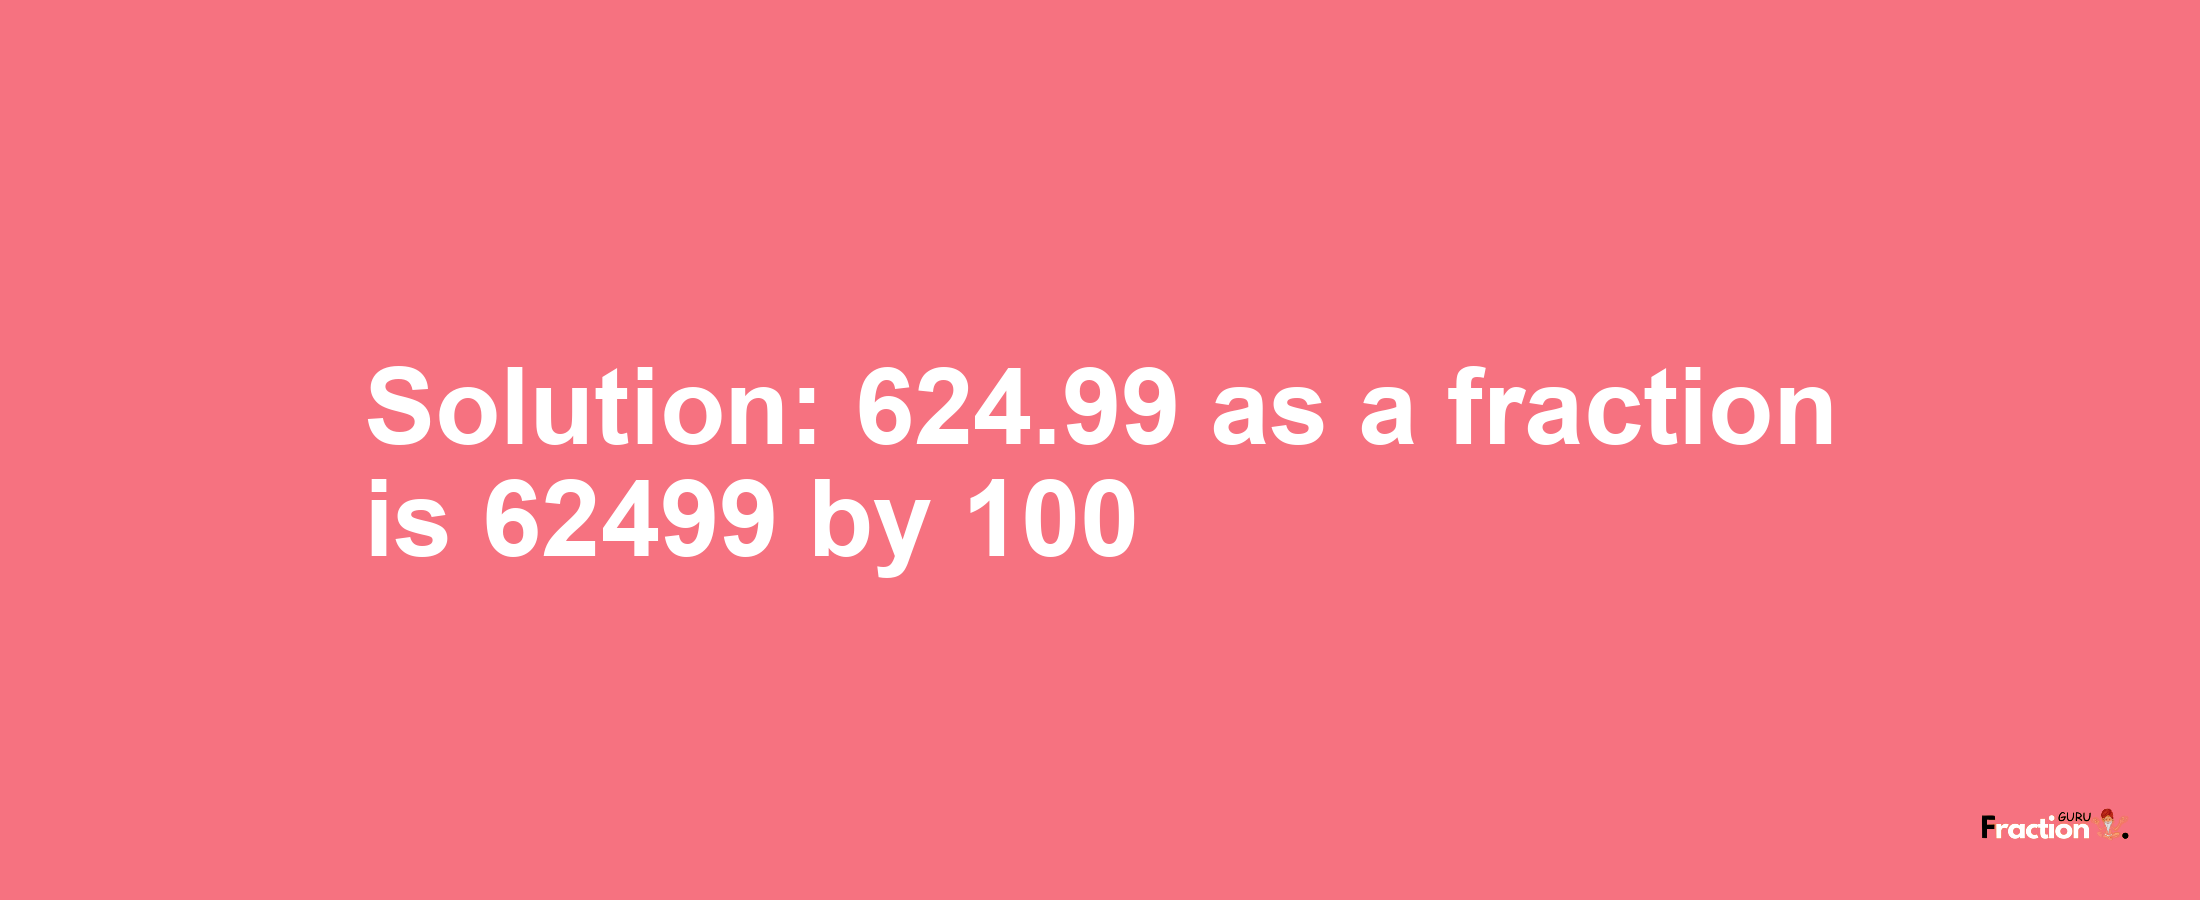 Solution:624.99 as a fraction is 62499/100